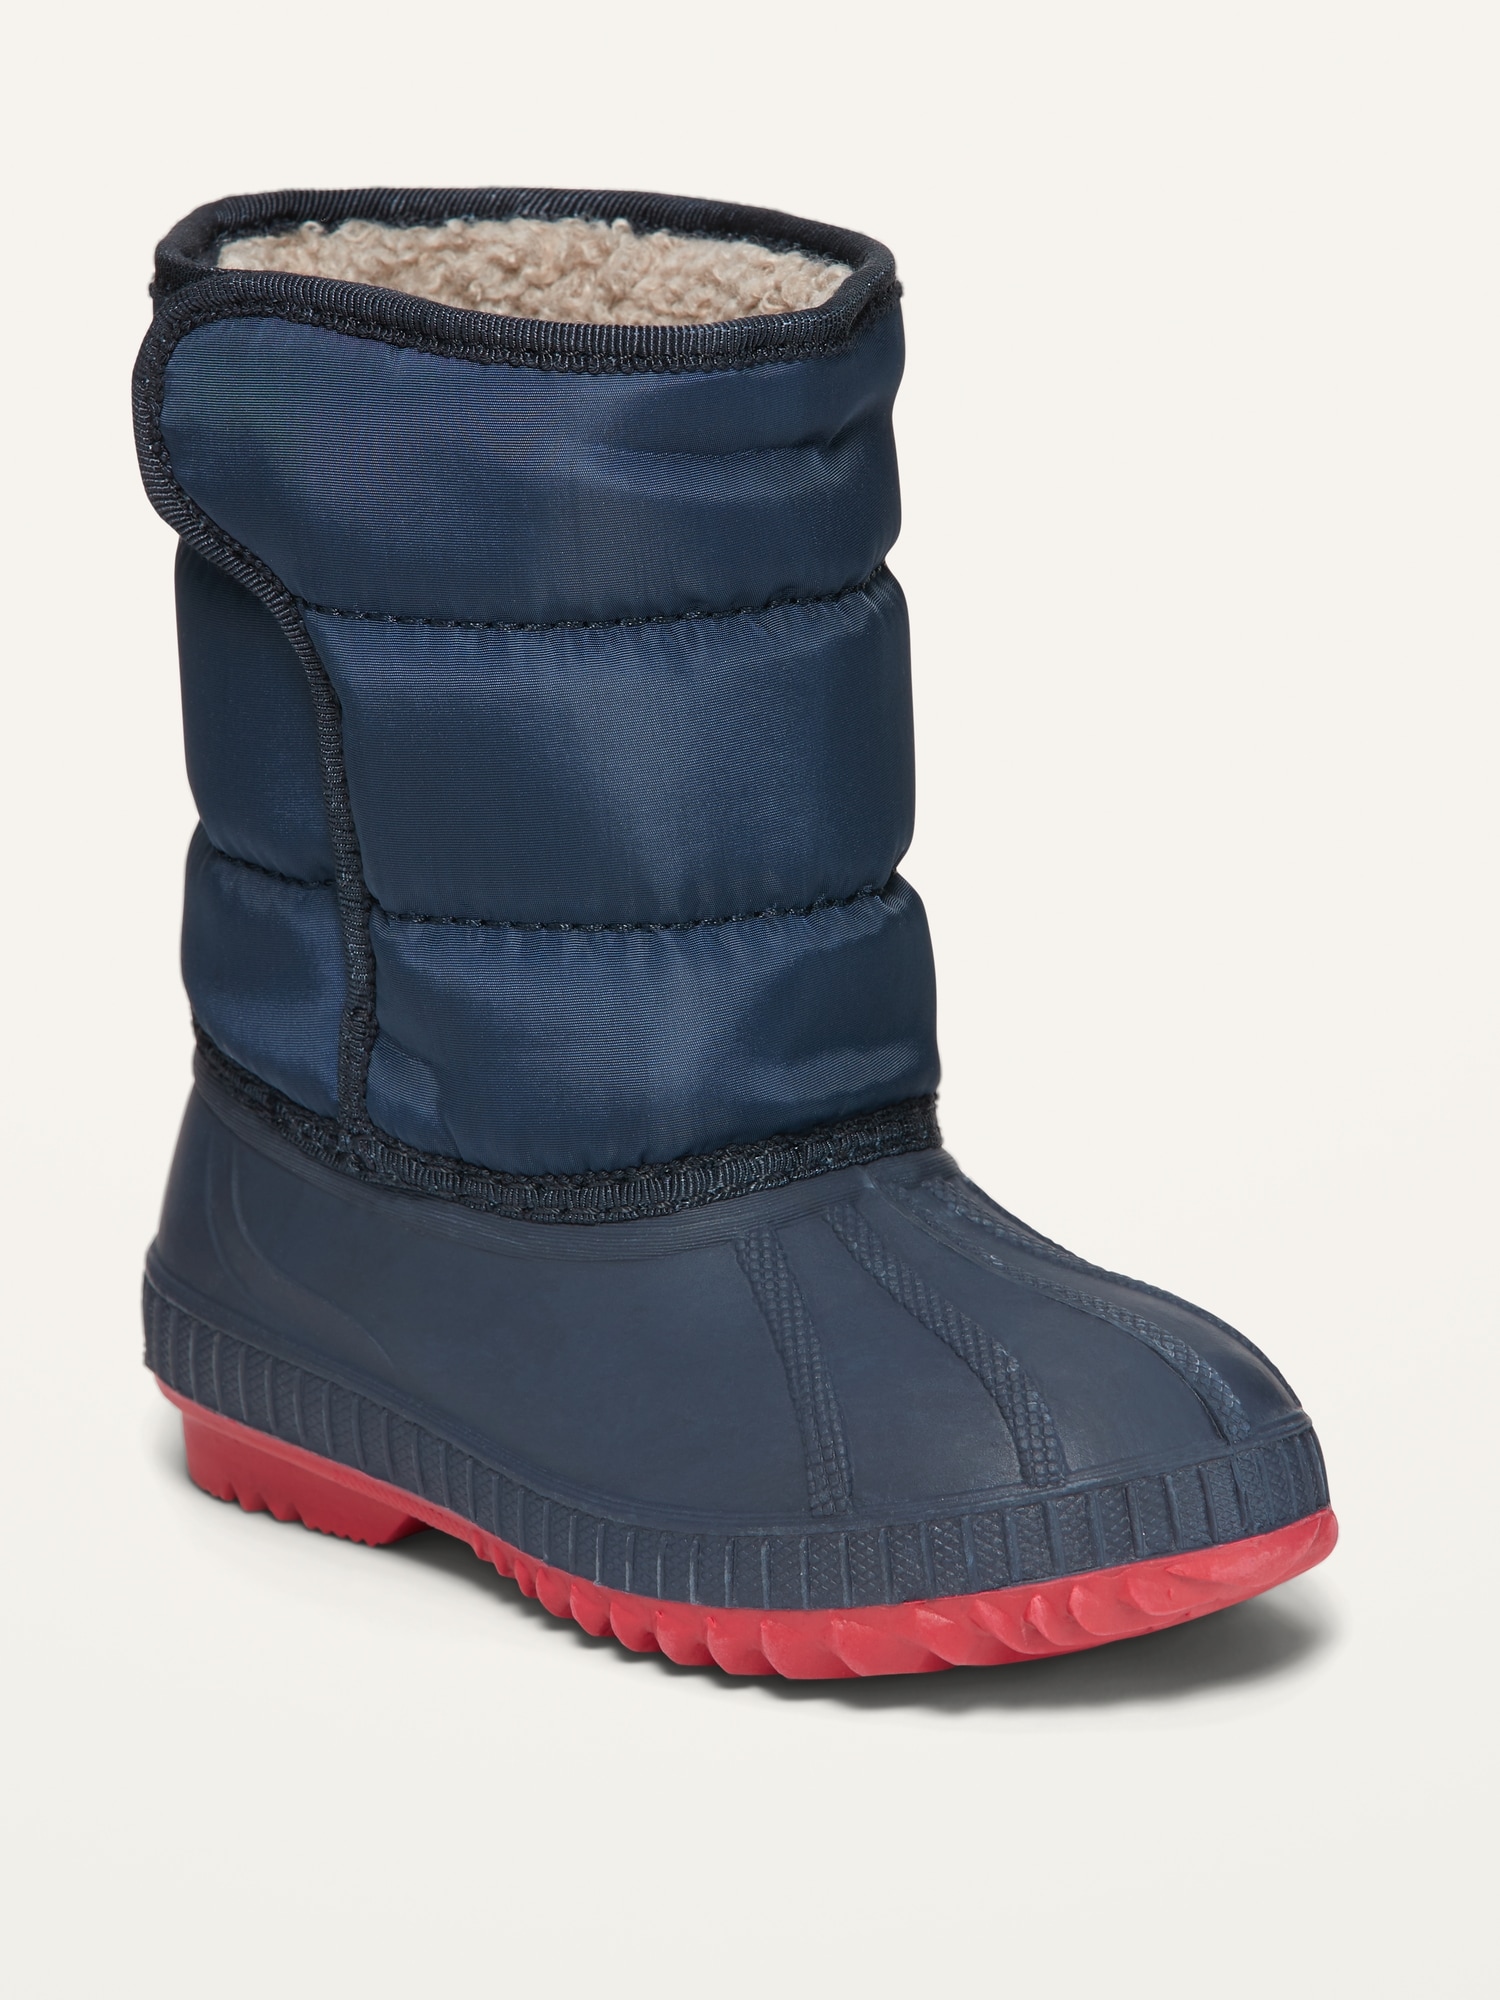 Quilted Snow Boots for Toddler Boys 